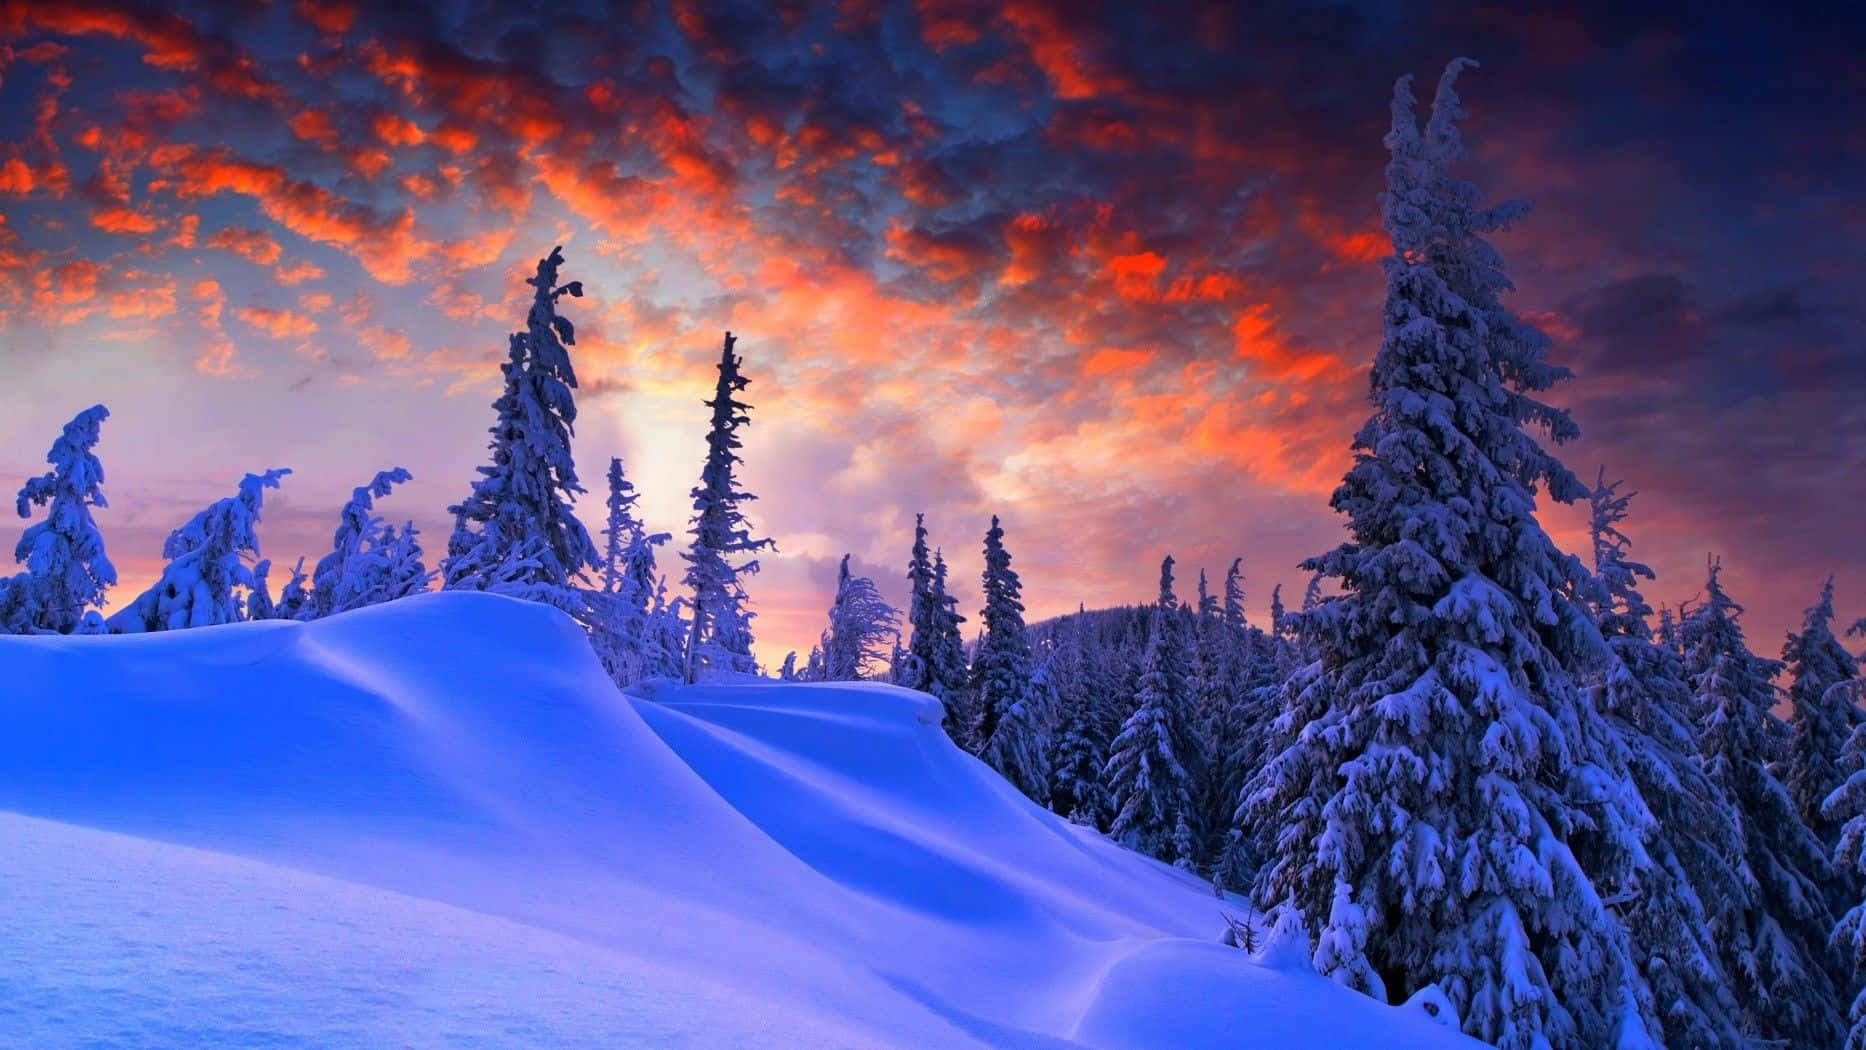 Breathtaking 1080p Winter Landscape // Description: Enjoy a stunning landscape view of a winter scene in the breathtaking resolution of 1080p. // Related Keywords: Winter, Nature, Landscape, Snow, Cold, 1080p, High Resolution, Beautiful